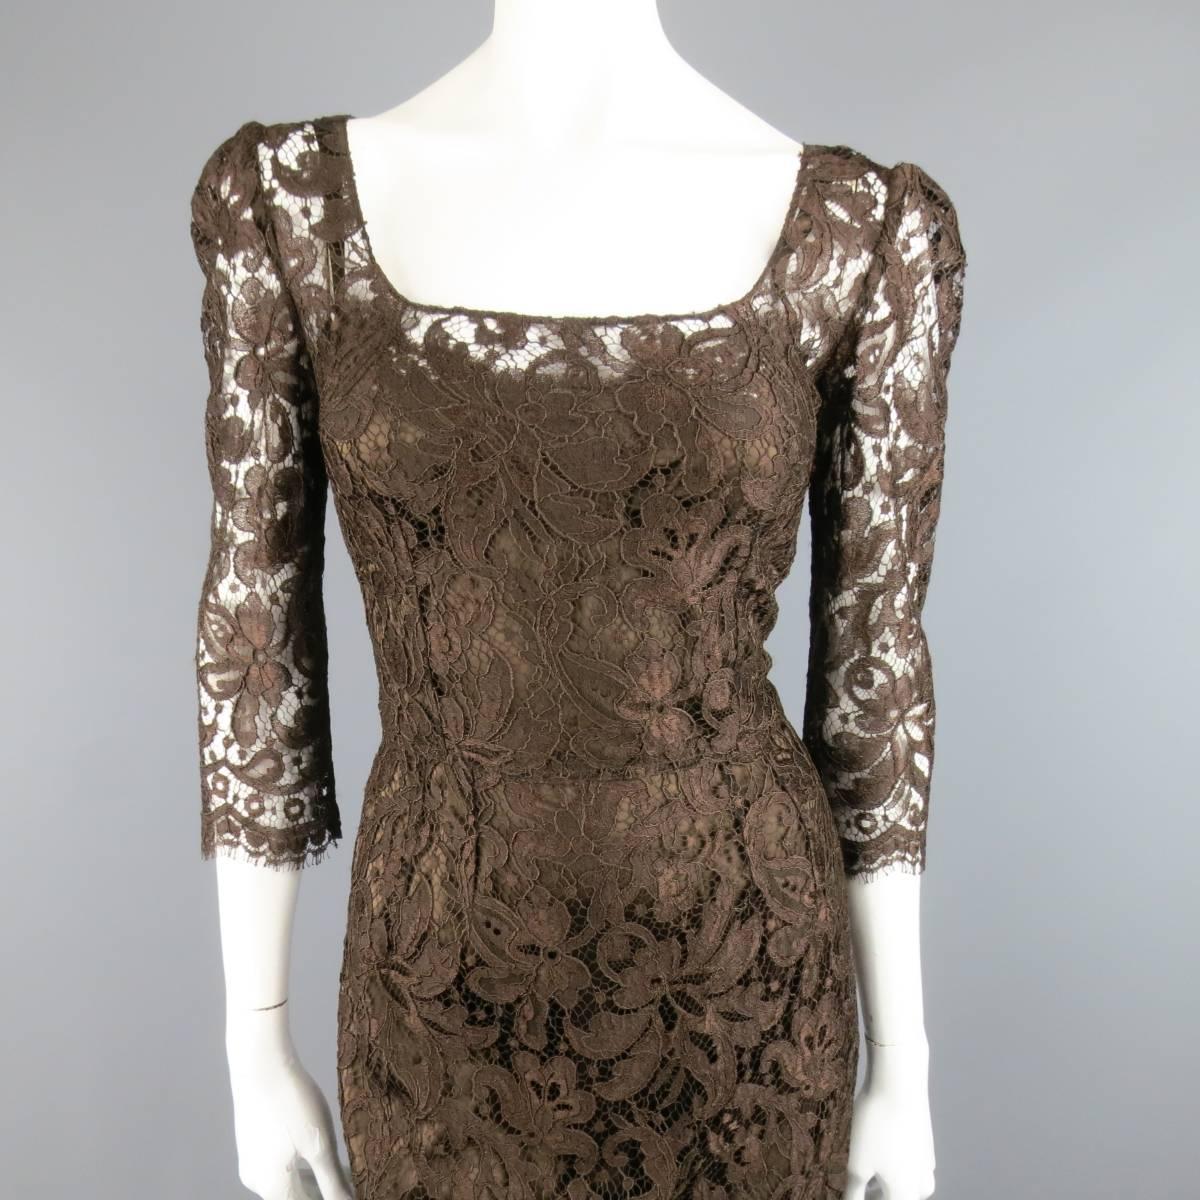 DOLCE & GABBANA cocktail dress in a chocolate brown lace featuring a scoop neck,  three quarter sleeves, fitted silhouette, v back, and built in stretch satin slip liner. Tags removed. Made in Italy.
 
Excellent Pre-Owned Condition. Retails at